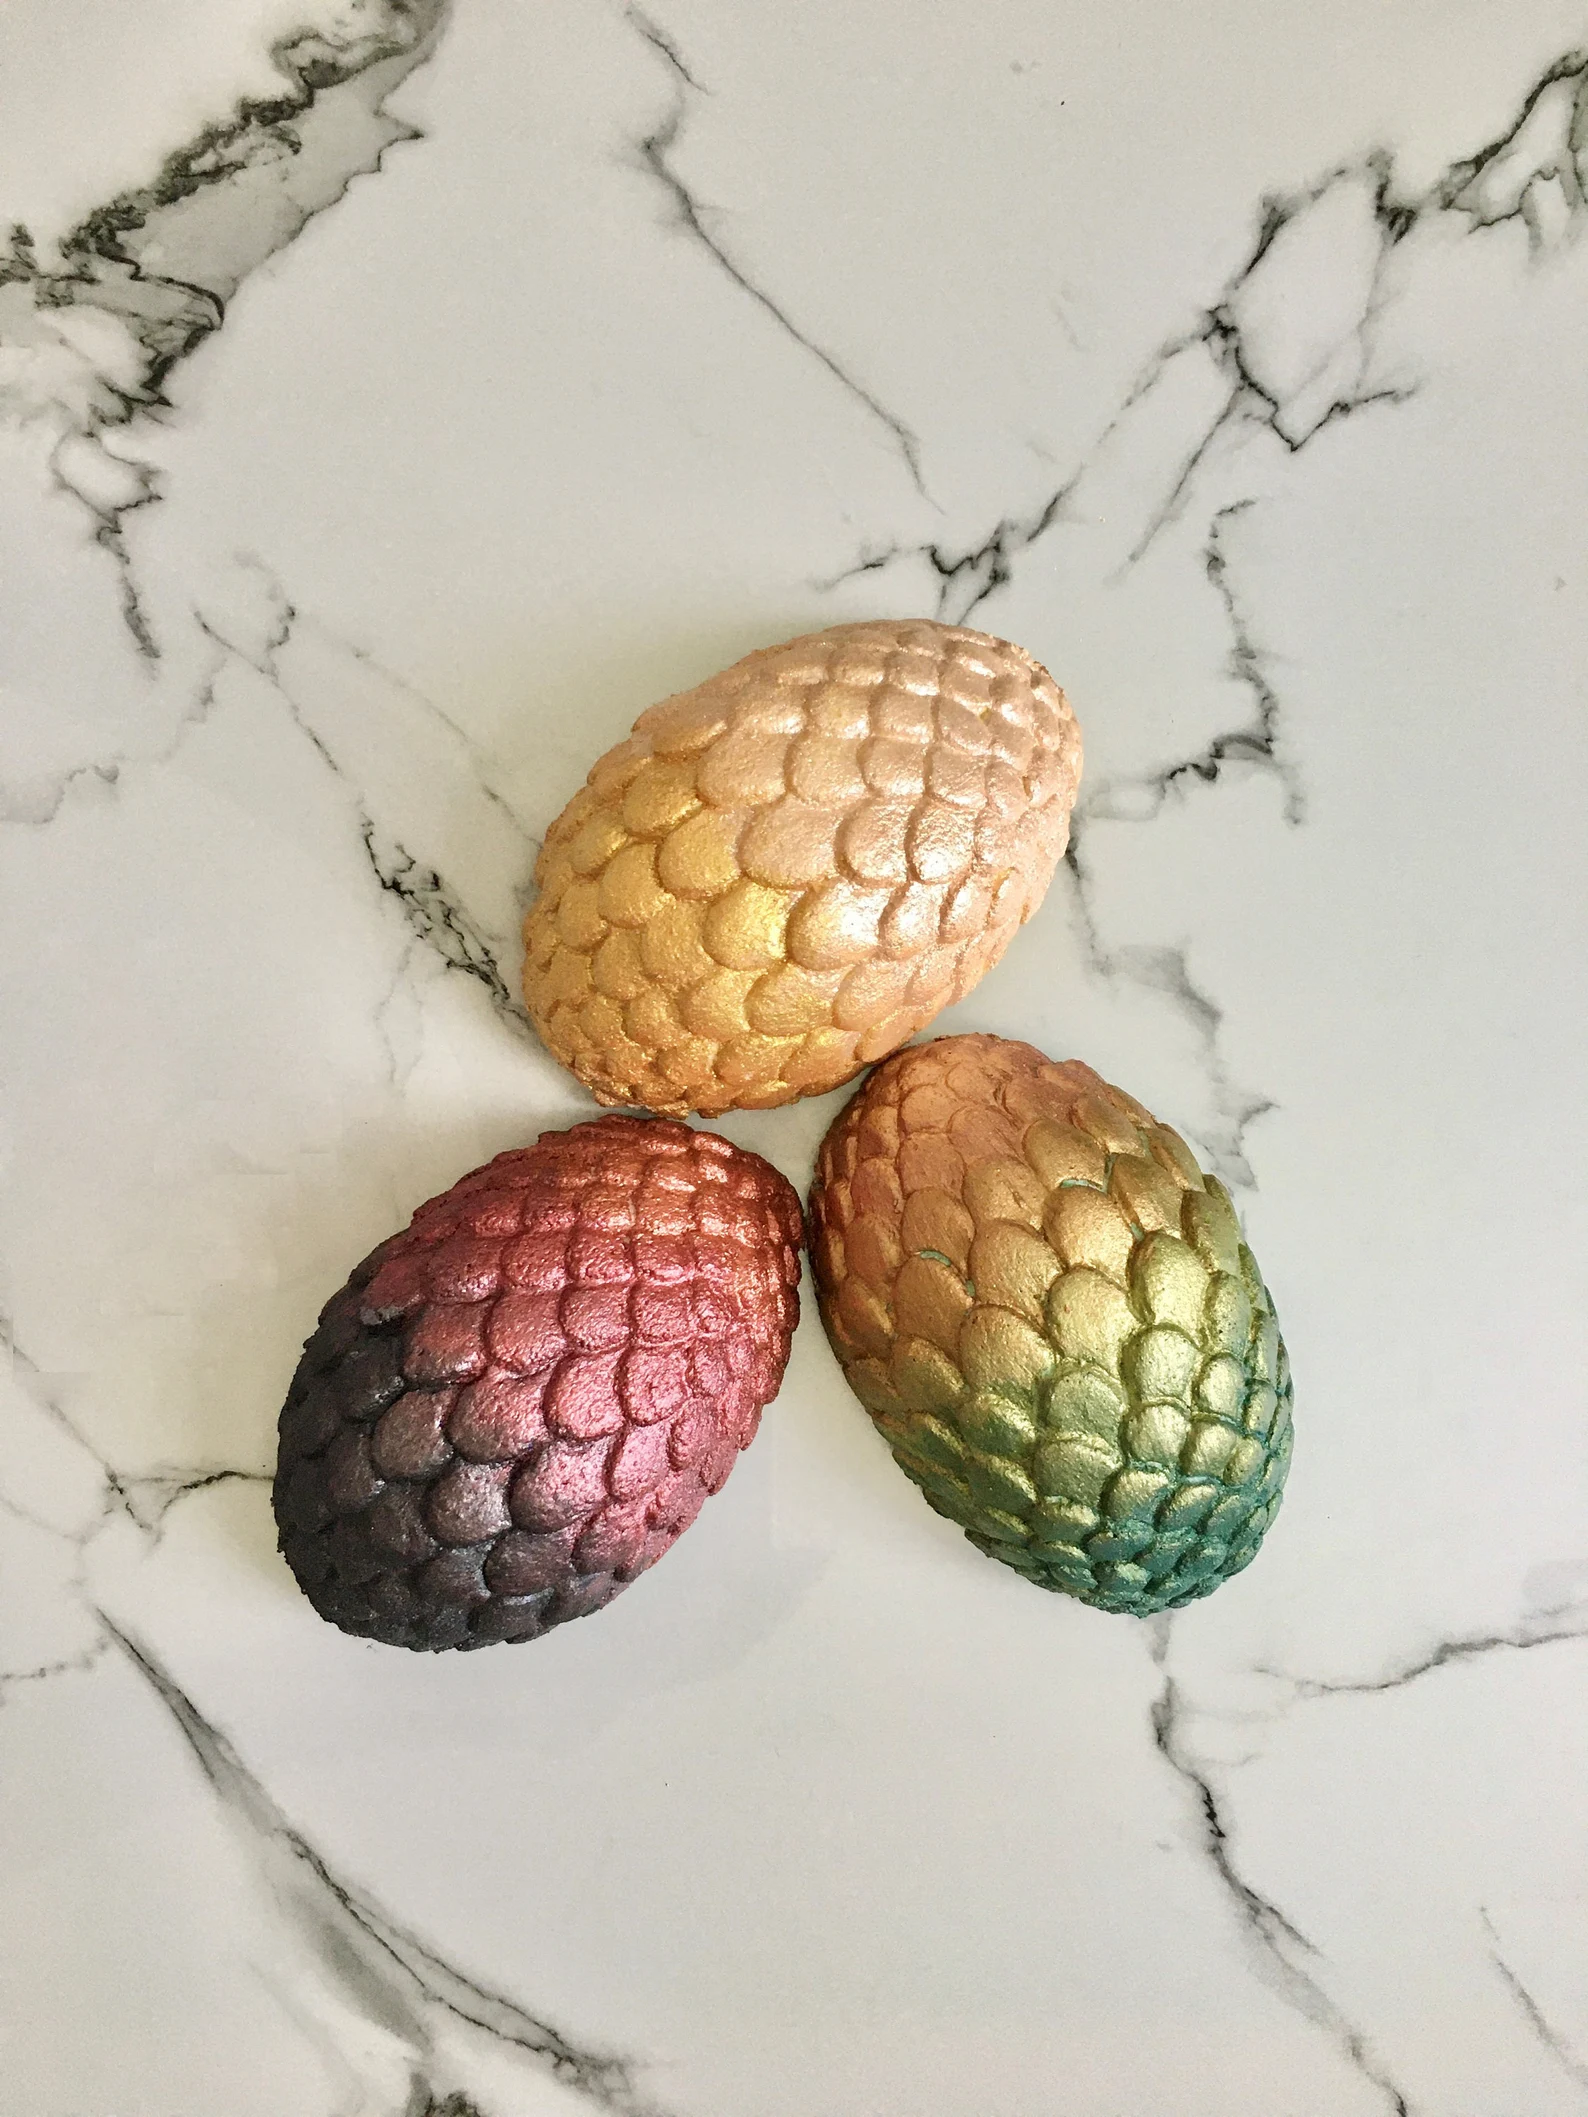 Etsy: bath bombs shaped like Game of Thrones-style dragon eggs